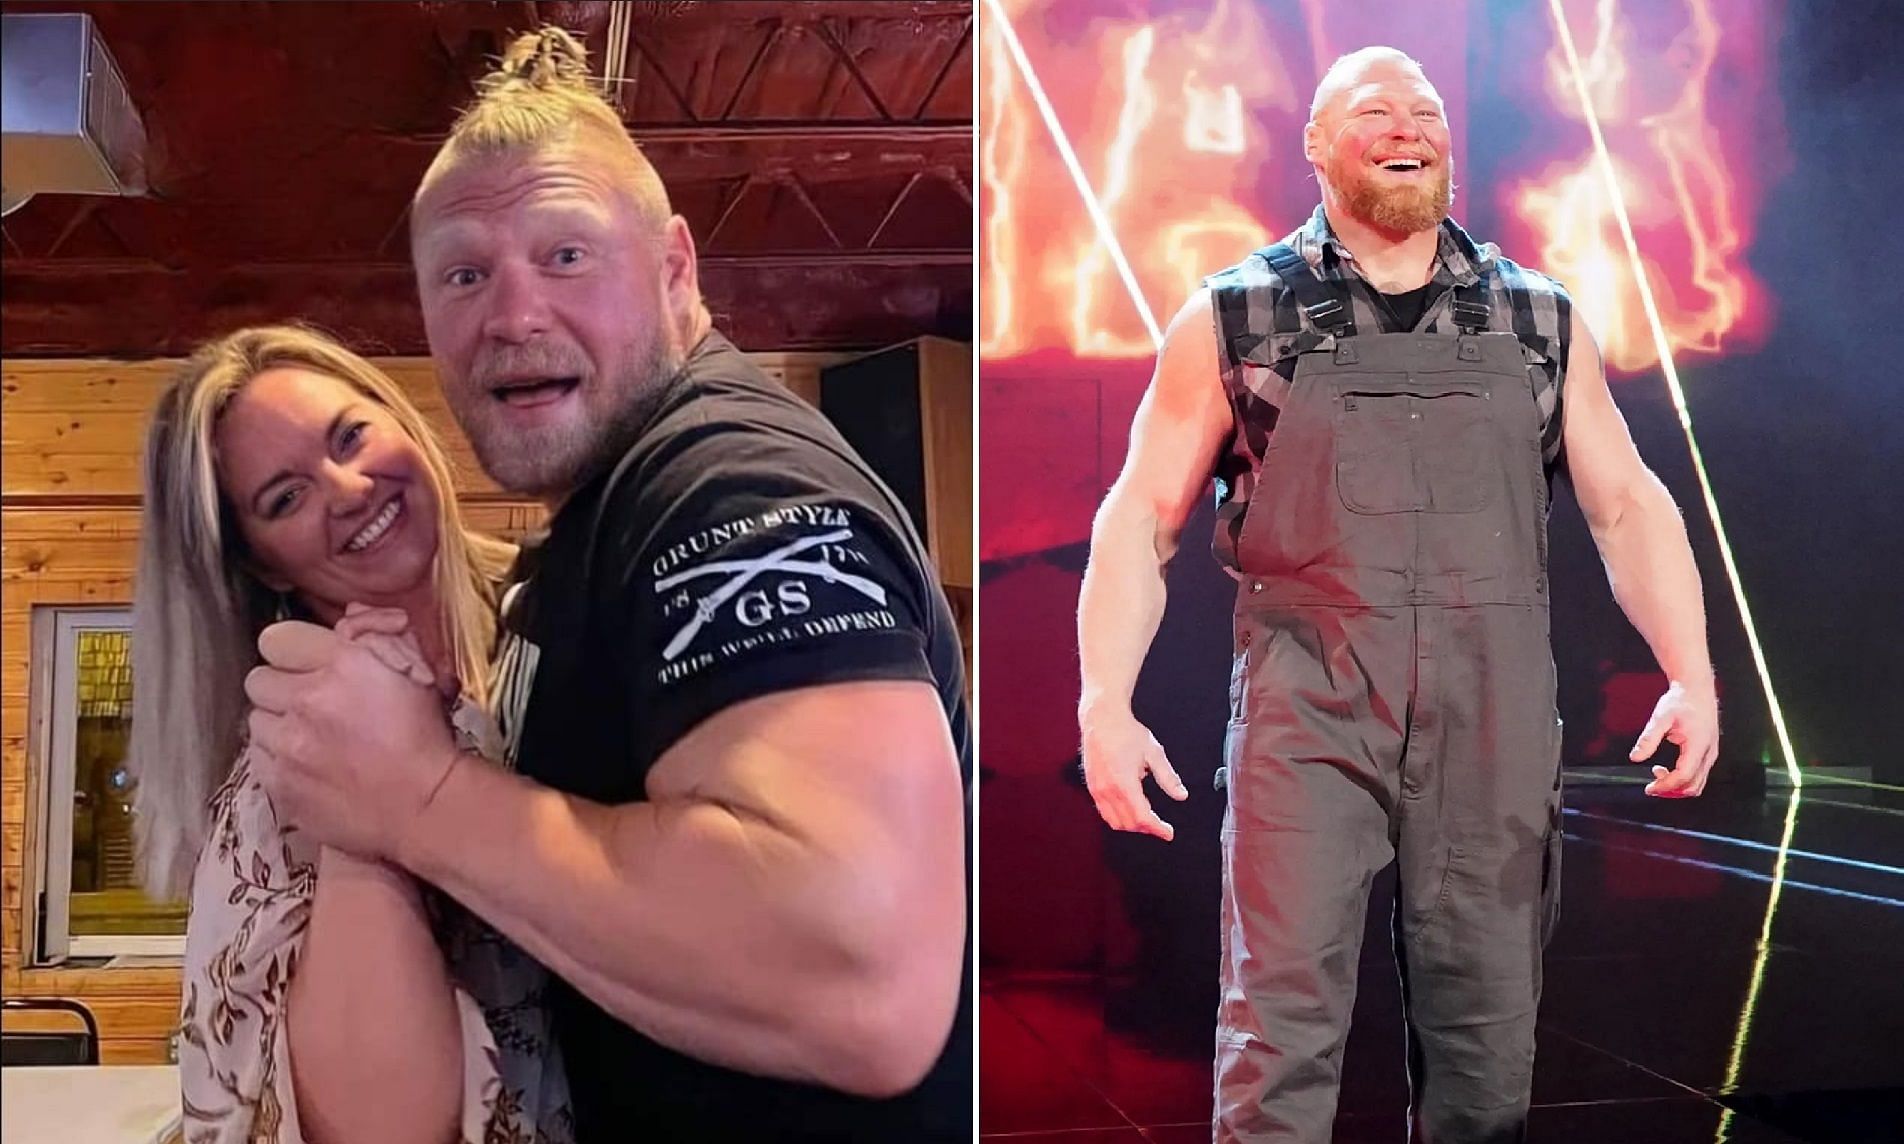 WWE News: Twitter reacts to Brock Lesnar dancing with a friend in new photo